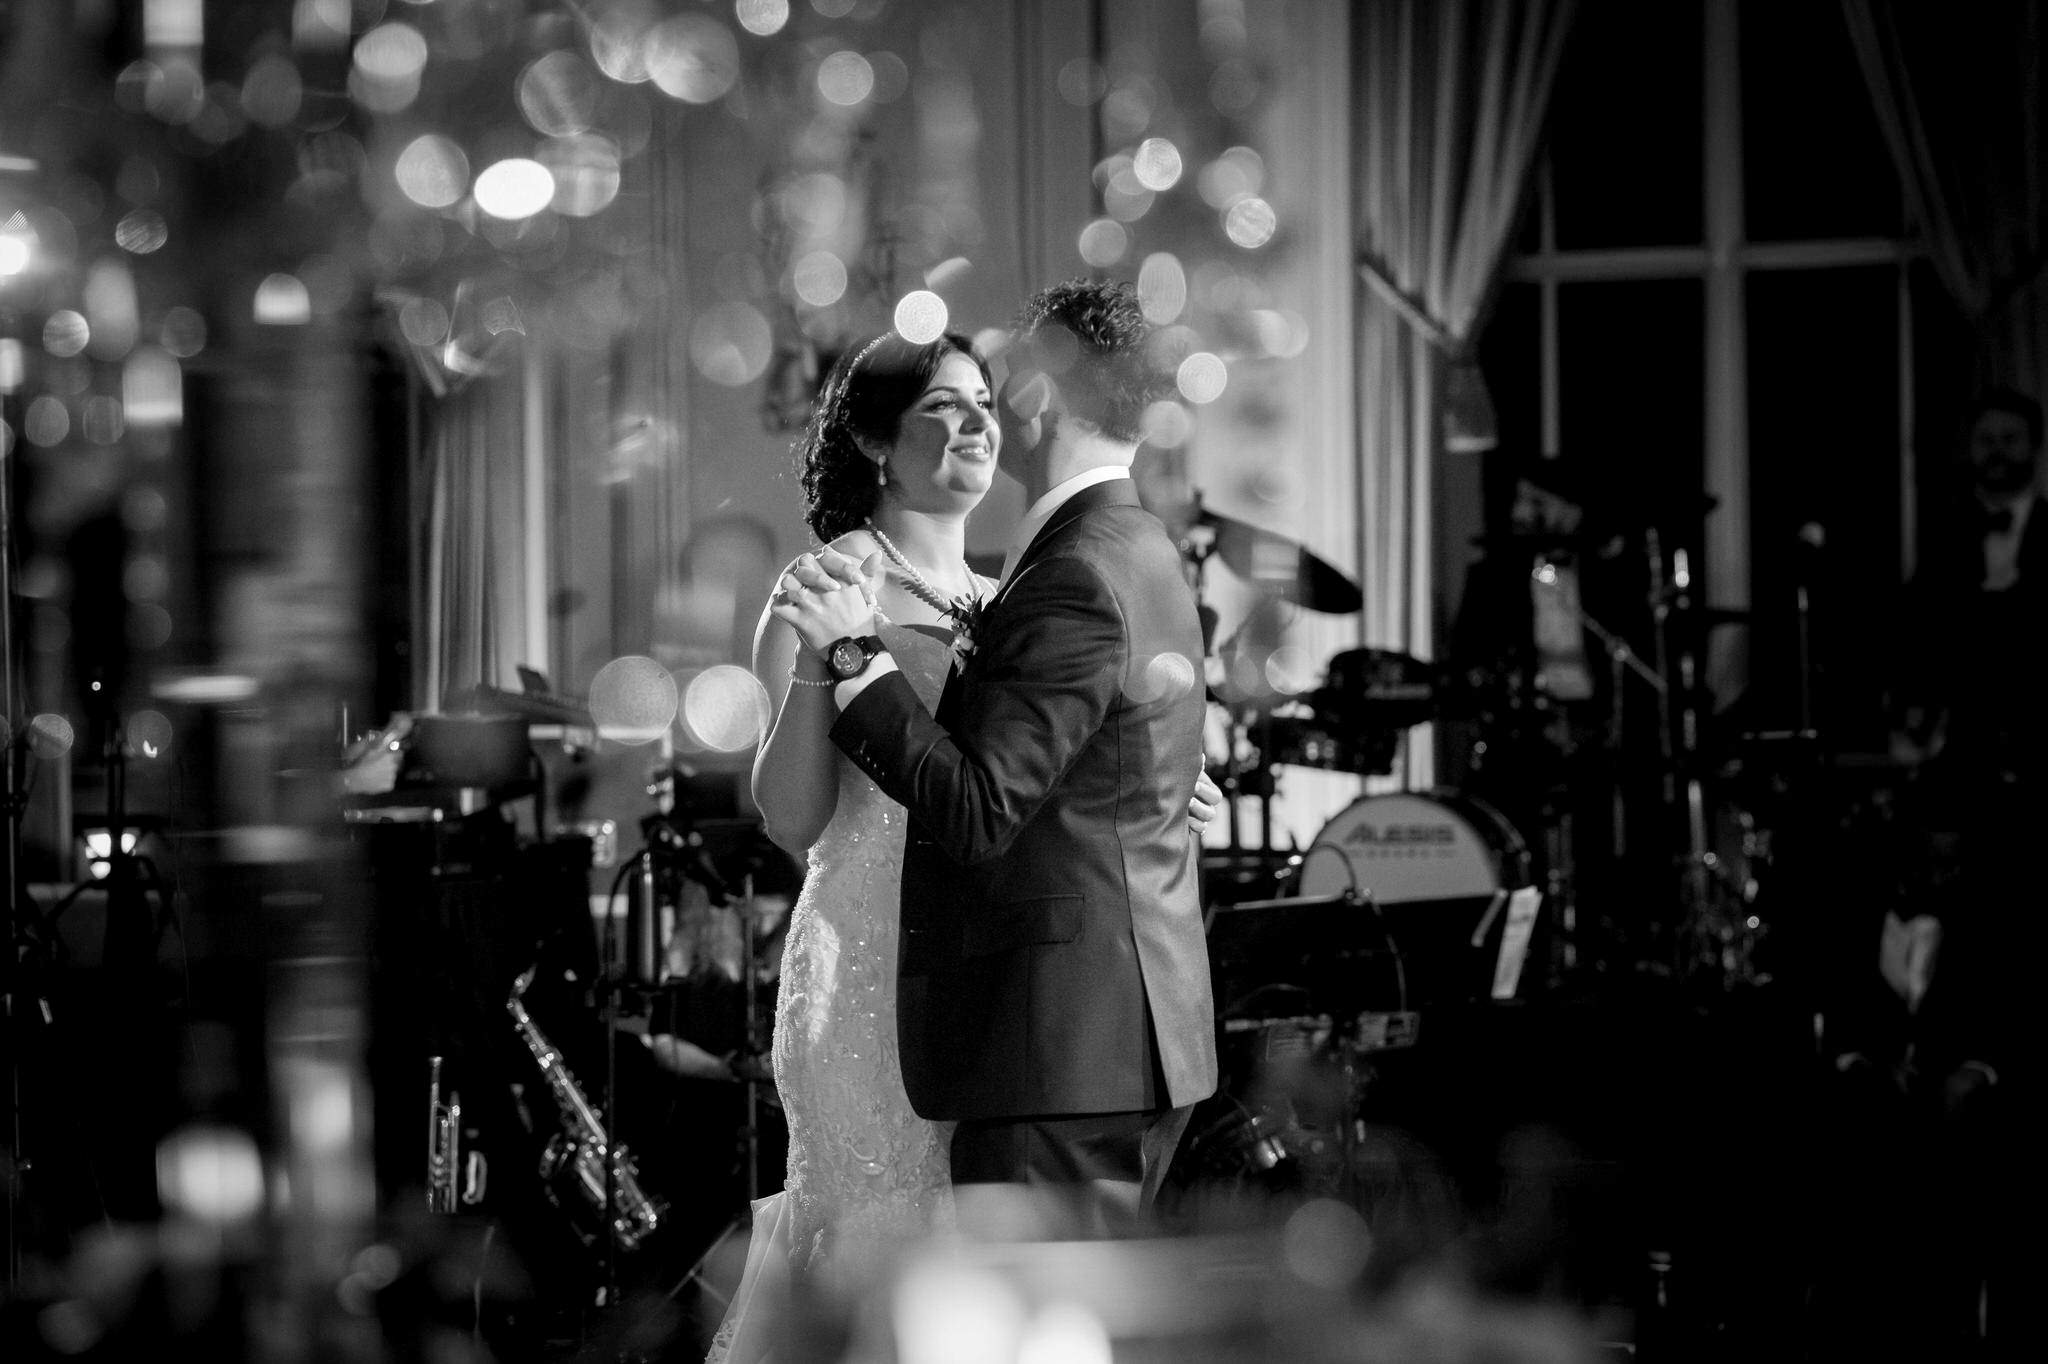 Shot through a centerpiece, a bride and groom share a first dance at their Colony Club Detroit wedding.